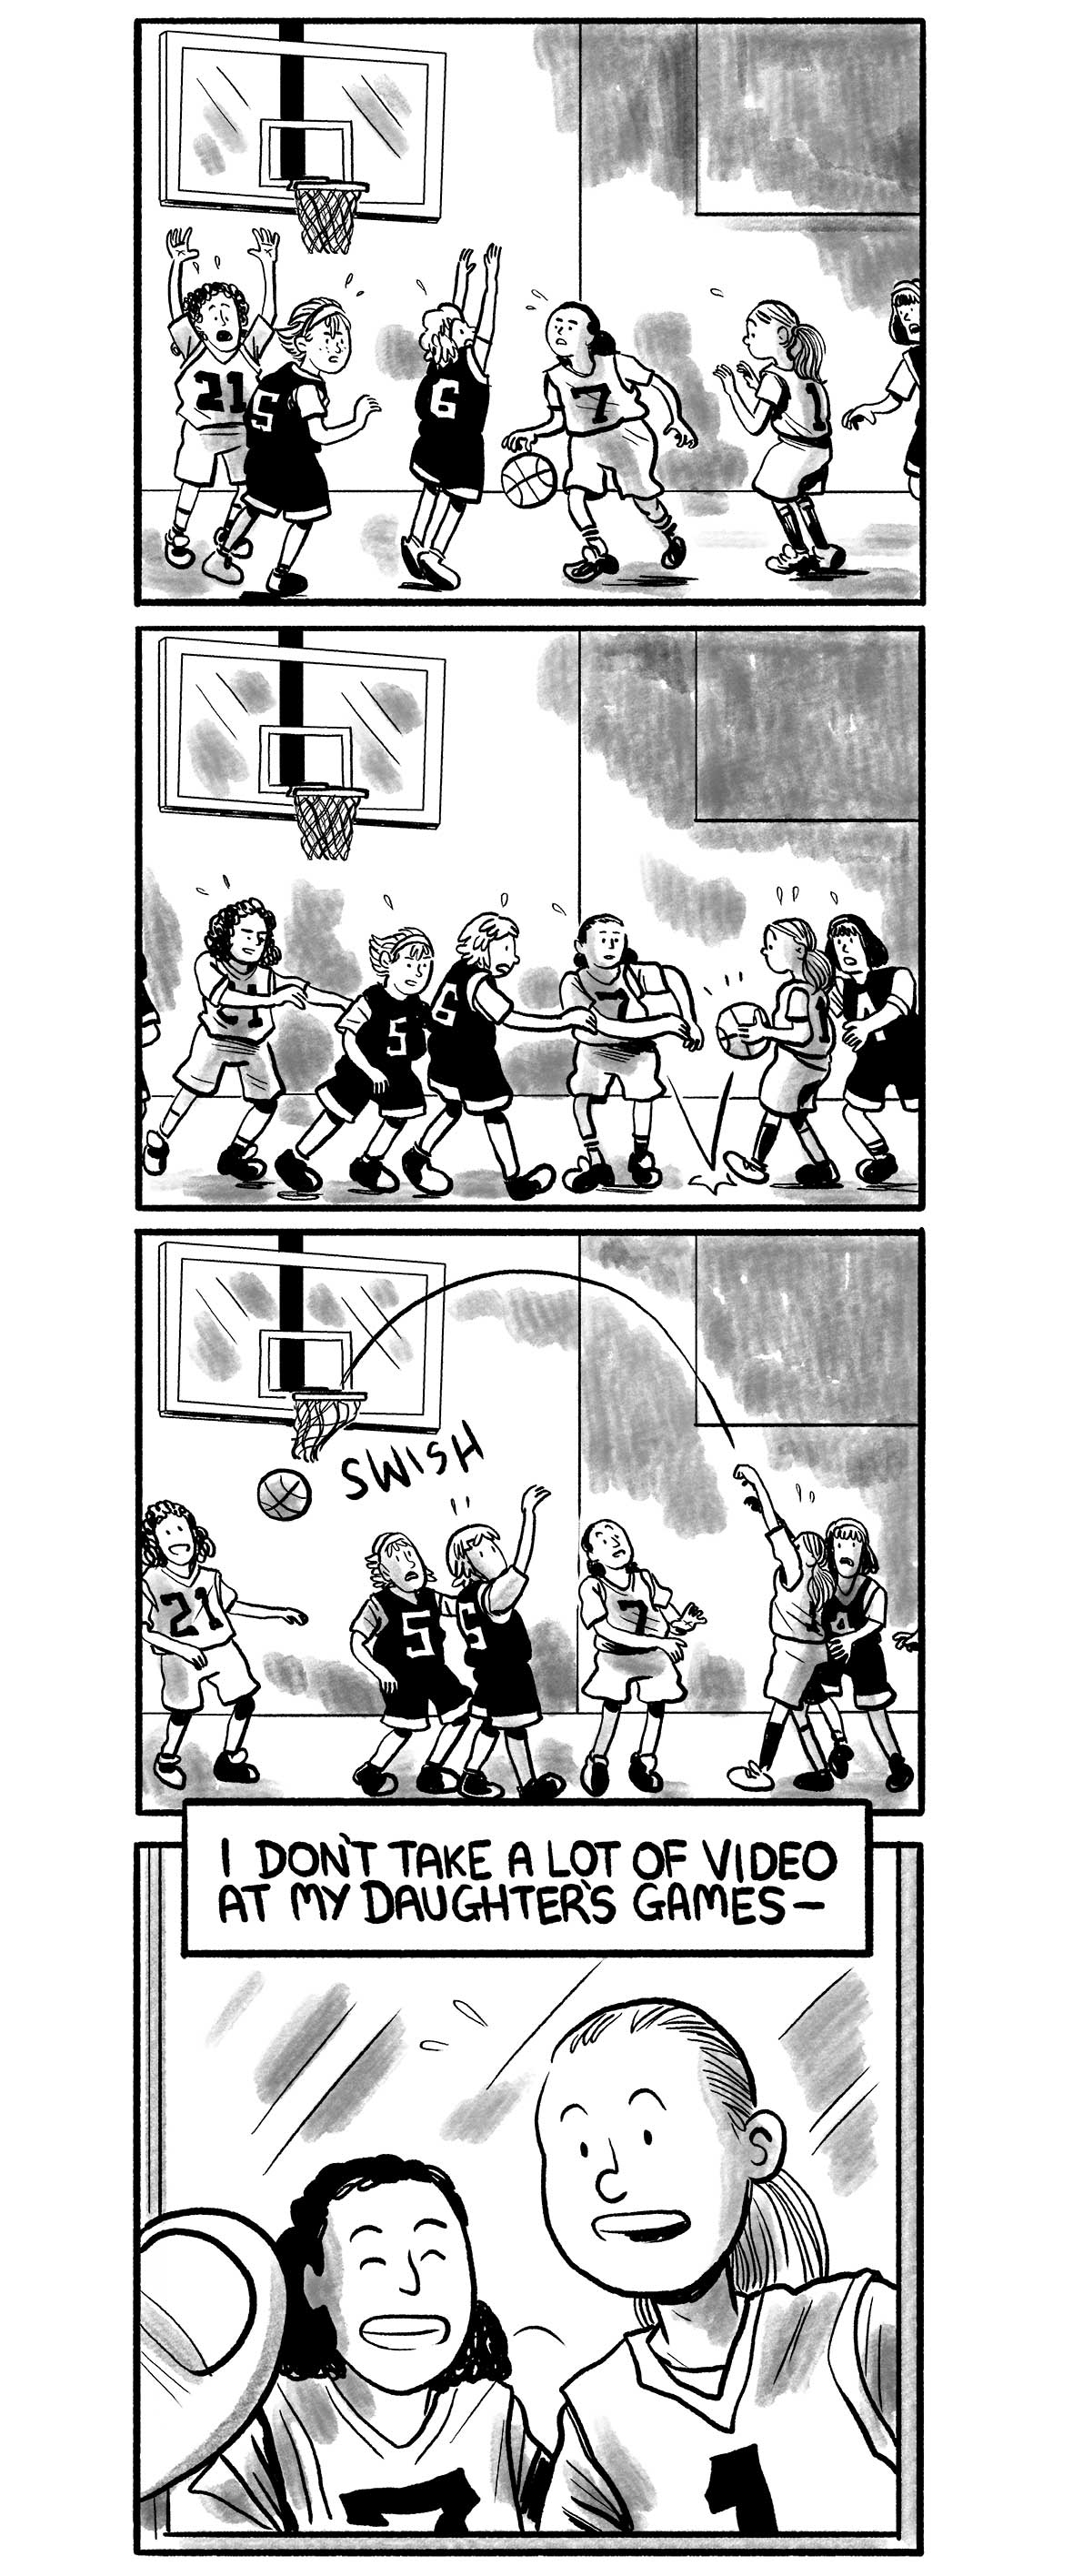 A kid's basketball game, No. 7 dribbles under heavy pressure from the opposing team. She passes the ball to No. 1. No. 1 takes a shot, it’s a swish.  The narrator says: “I don’t take a lot of video at my daughter’s games -”  The narrator’s mobile phone displays a still frame of his daughter smiling.